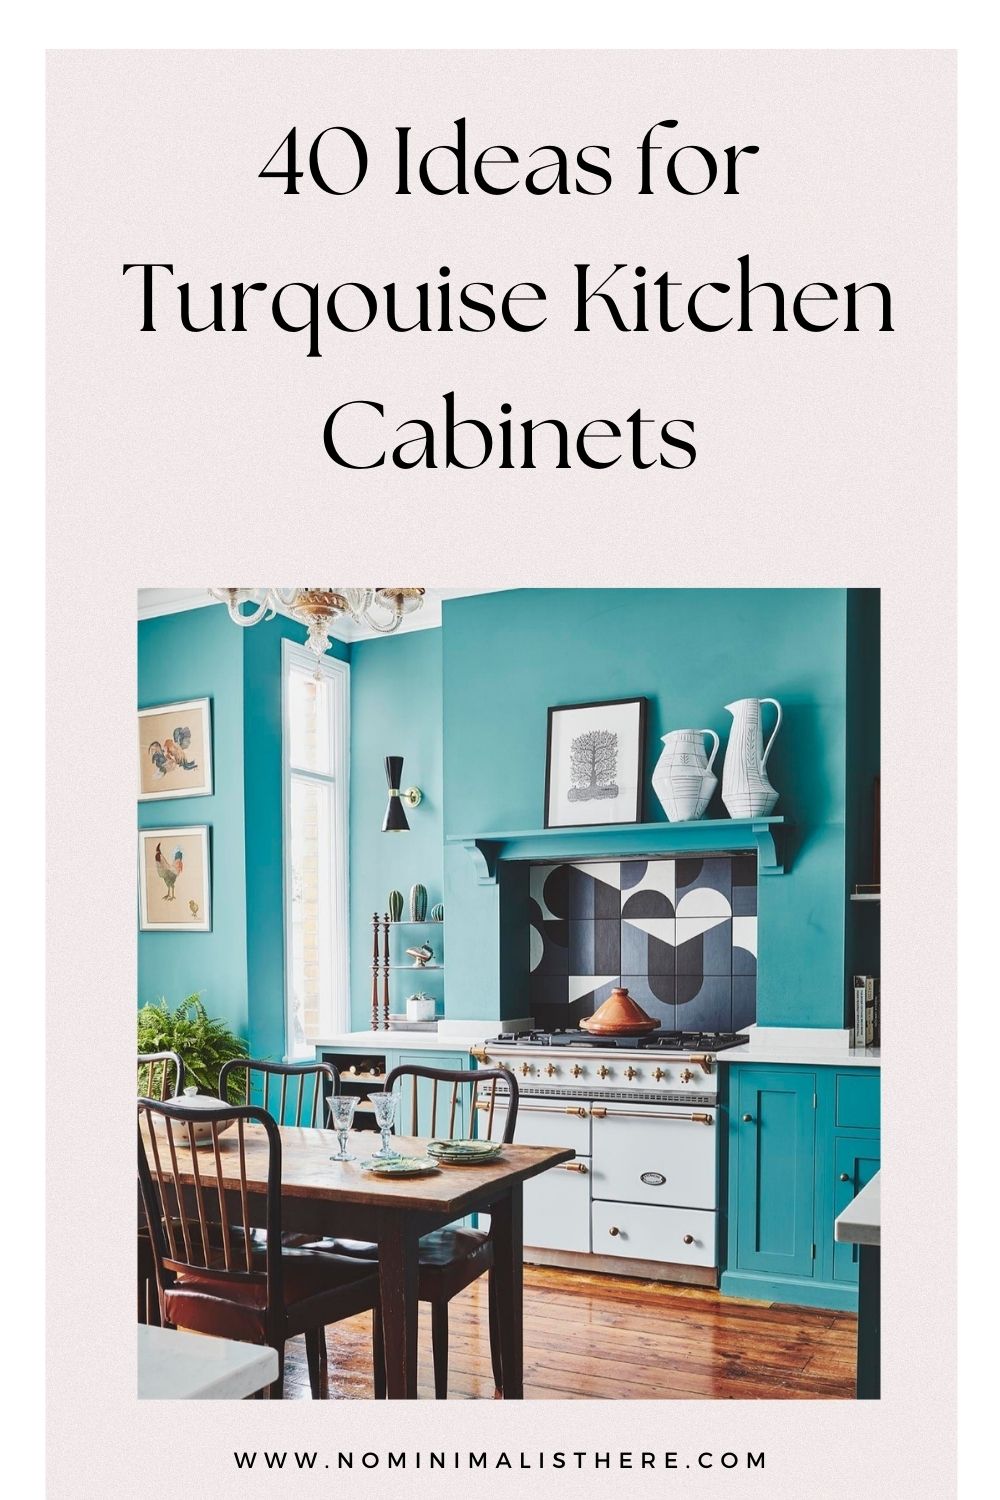 pinterest image for an article about turquoise kitchen cabinets